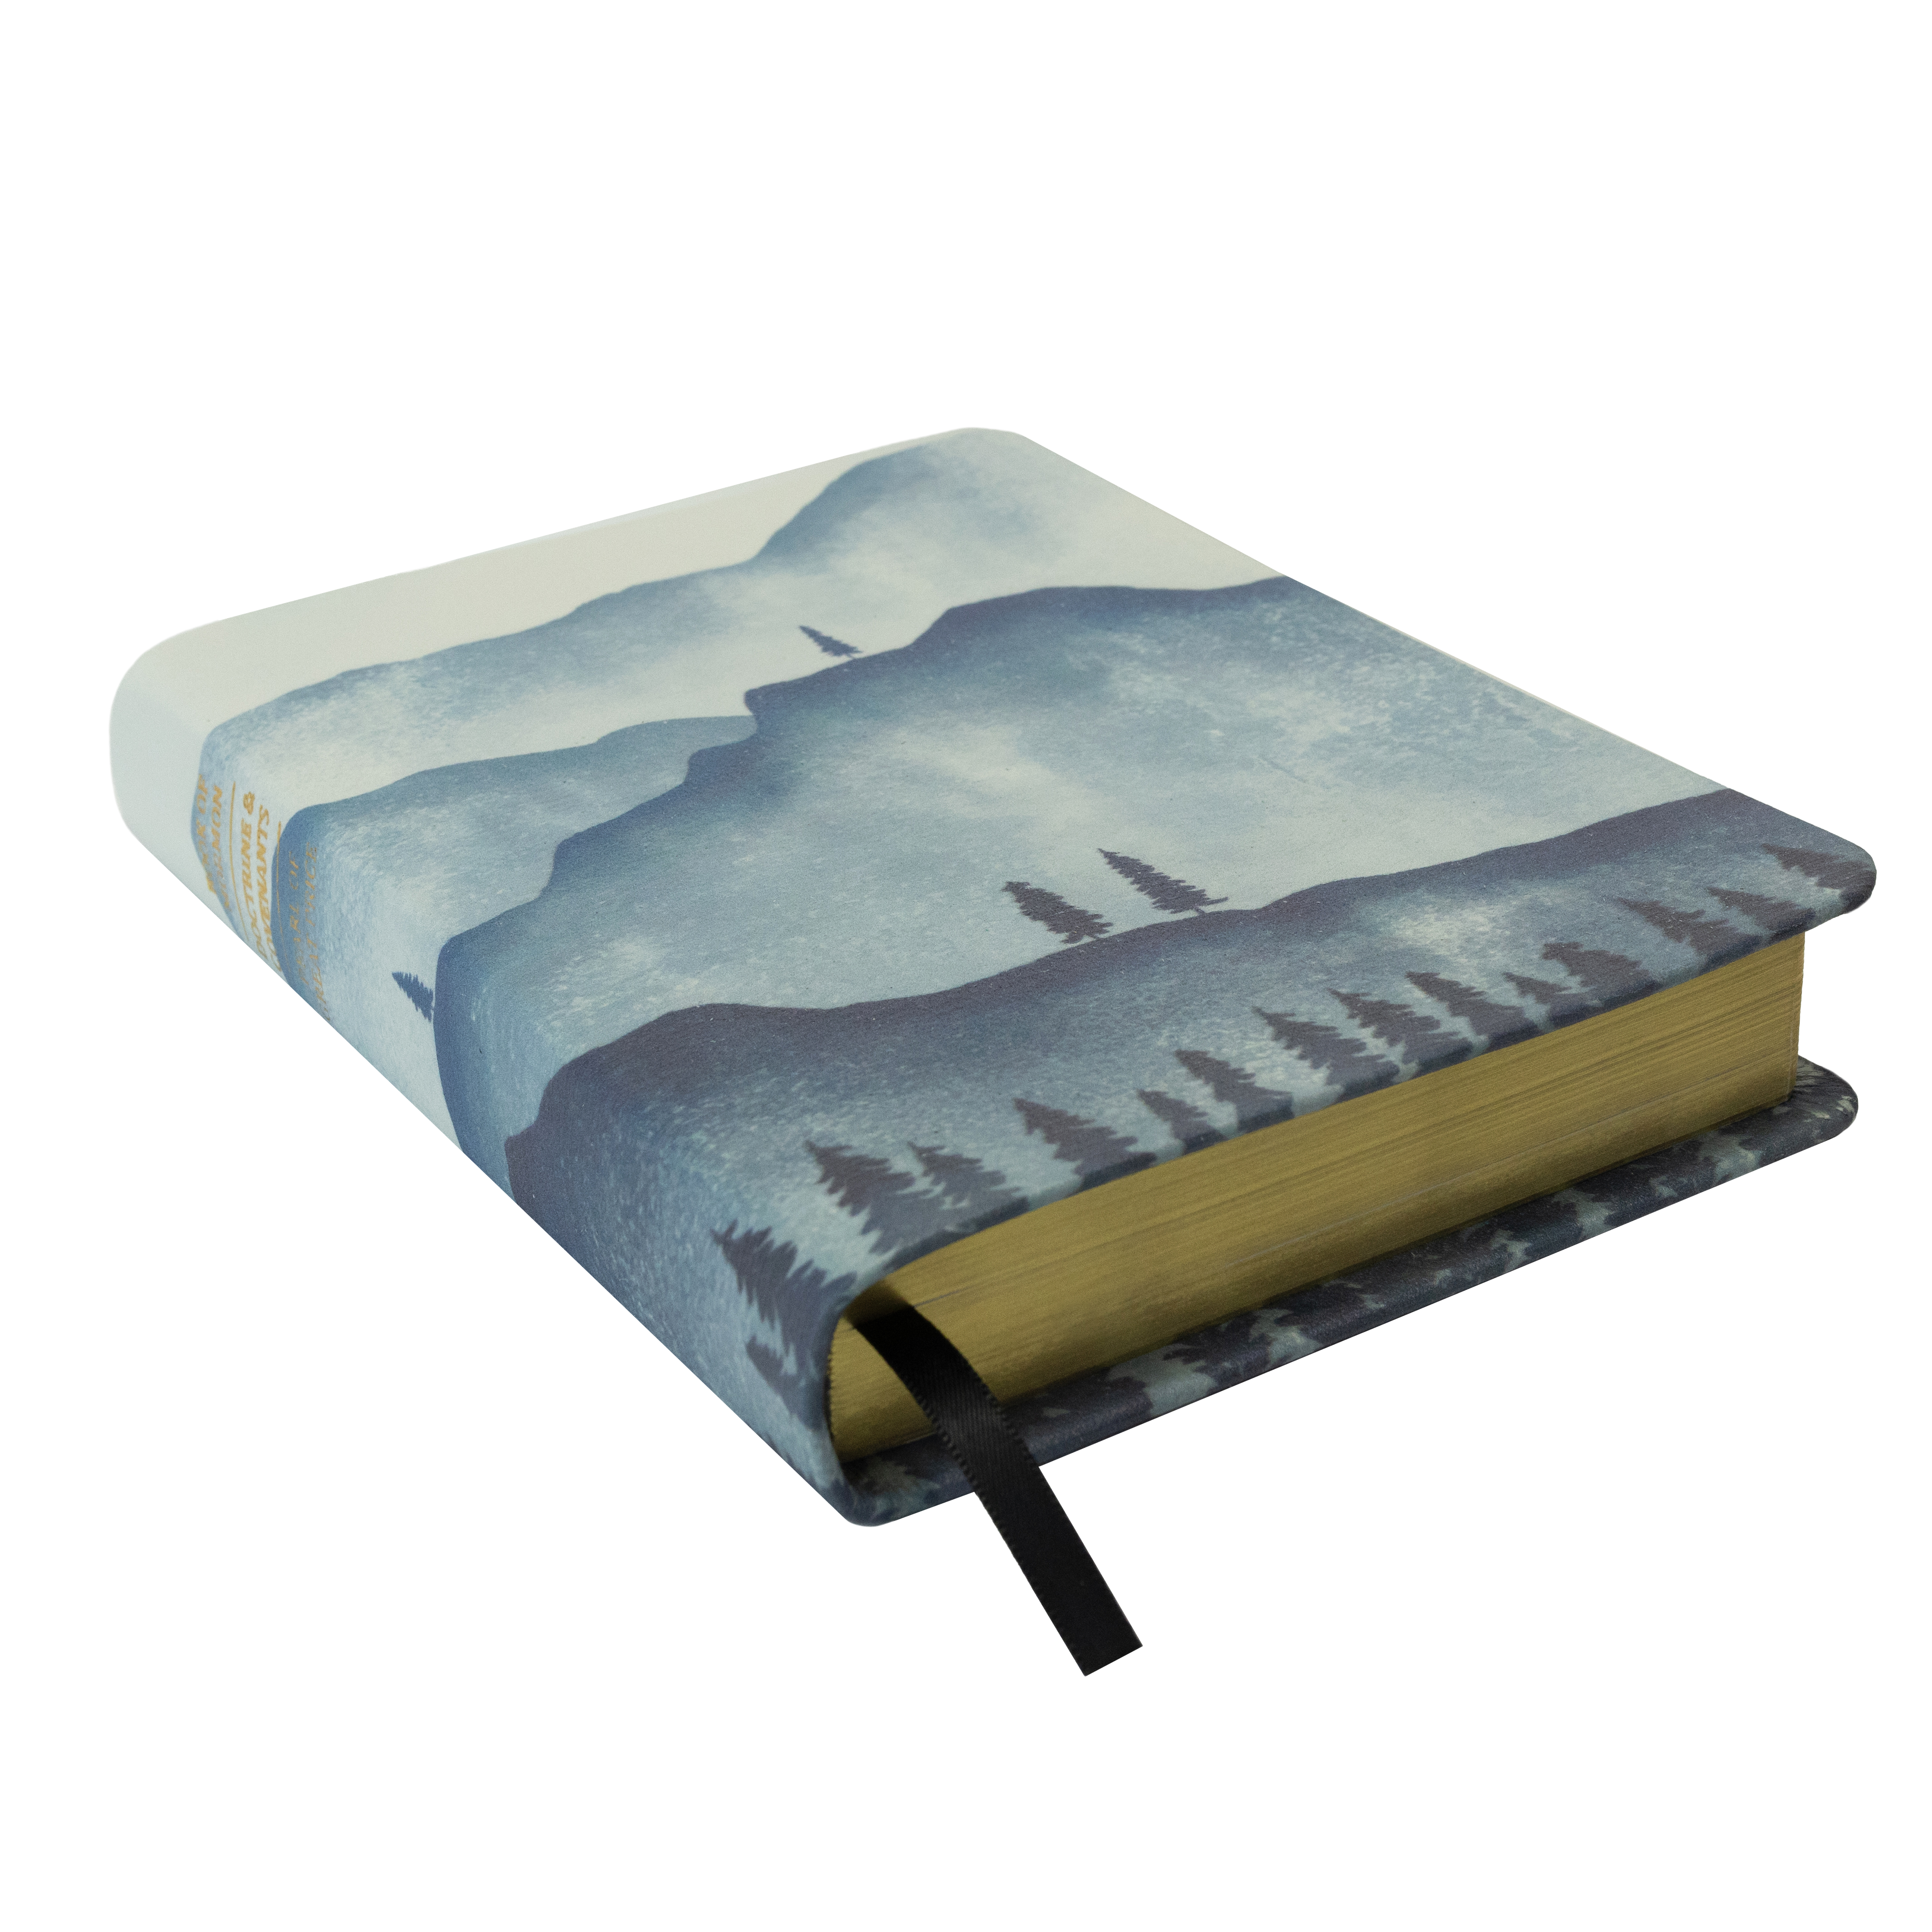 Hand-Bound Genuine Leather Triple - Mountain Mists mountain scriptures, mountain pattern, mountain pattern scriptures, mountains, pattern scriptures, patterned scriptures, blue scriptures, lds scriptures, scriptures